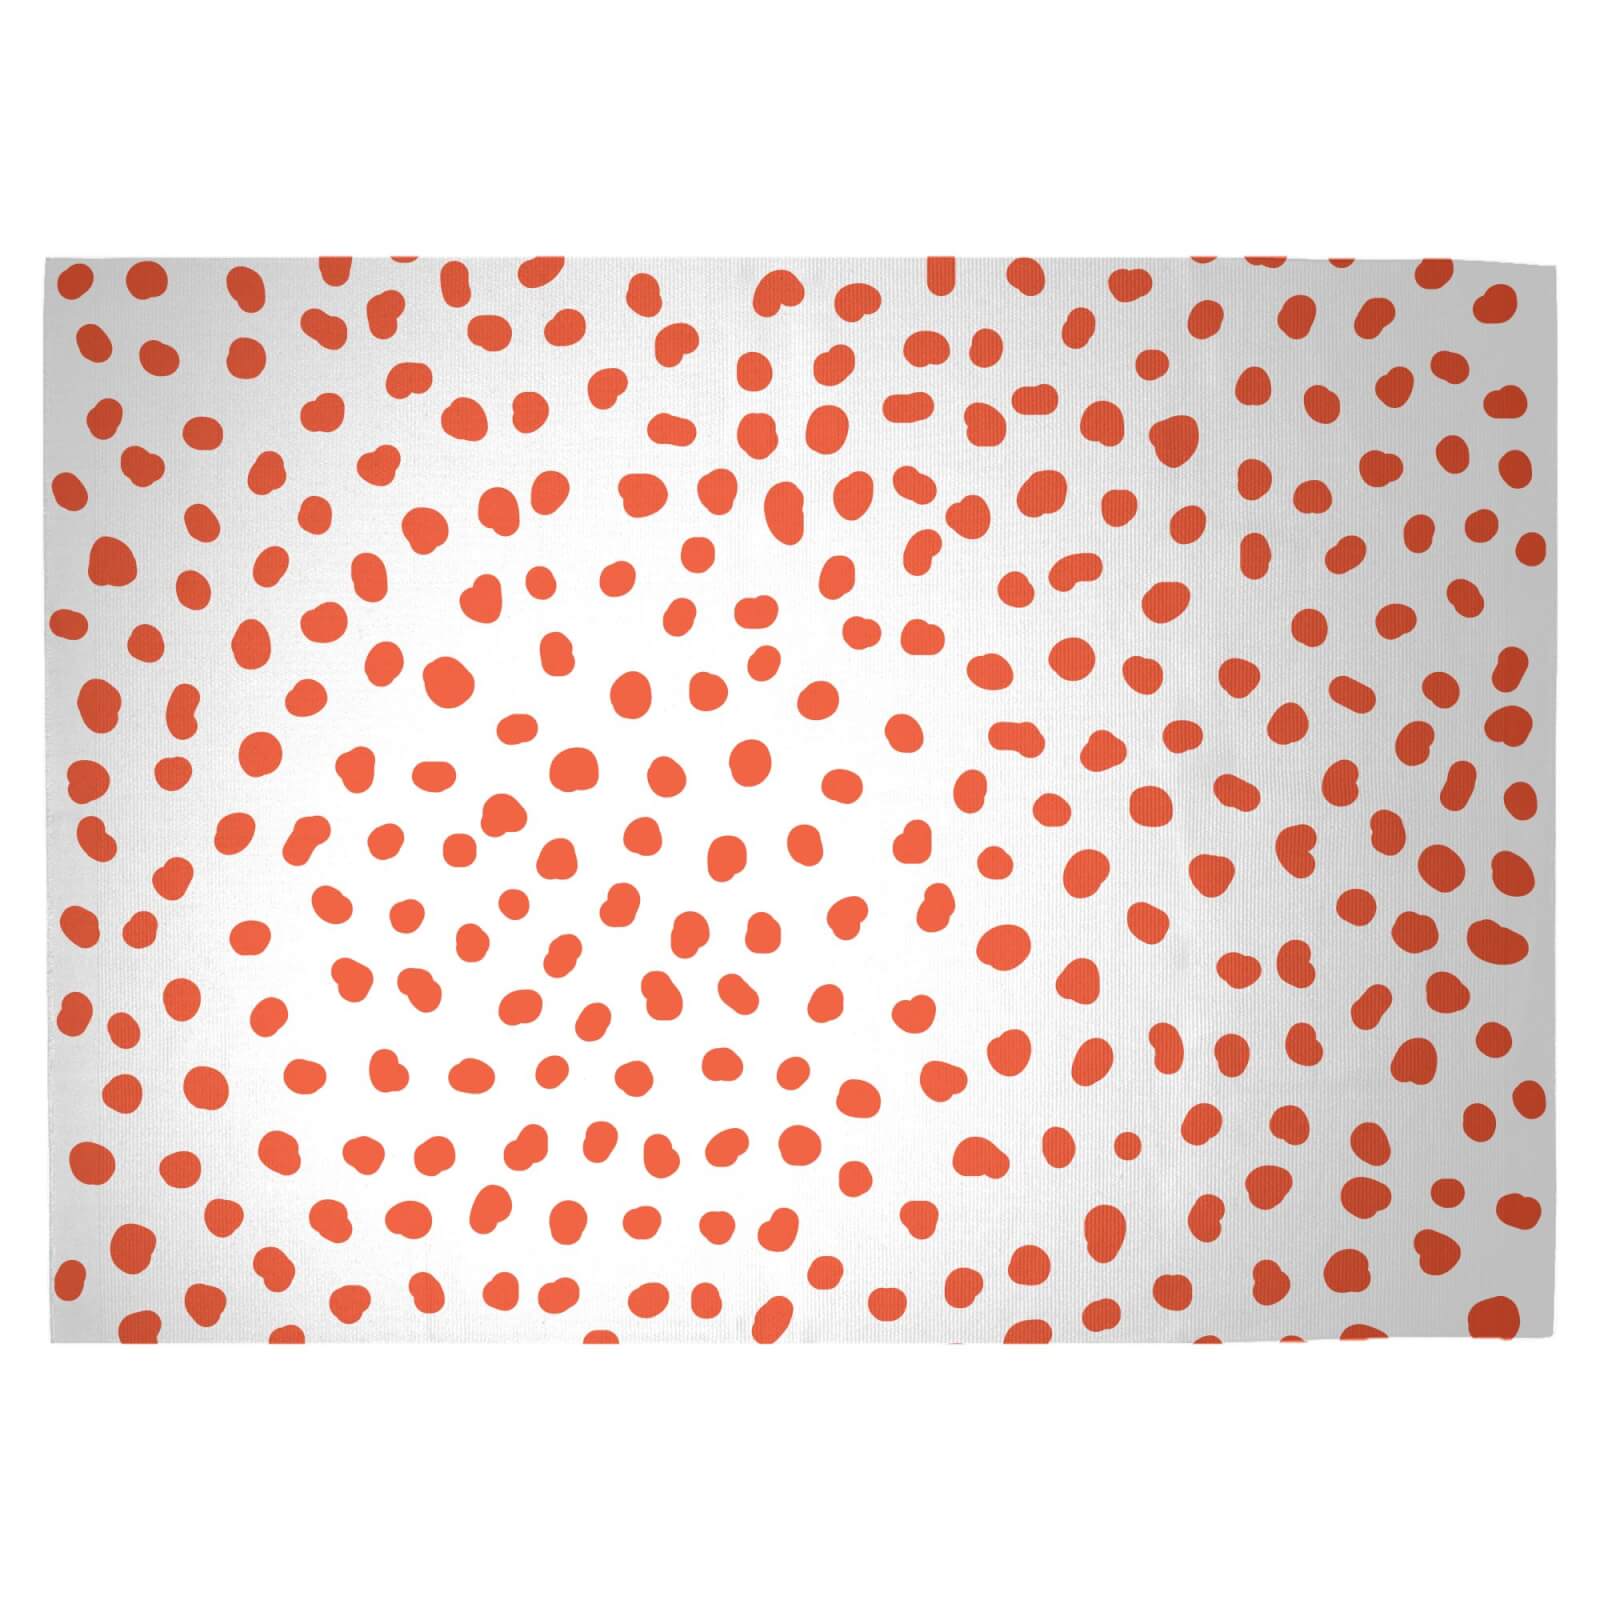 Hot Spots Woven Rug - Large